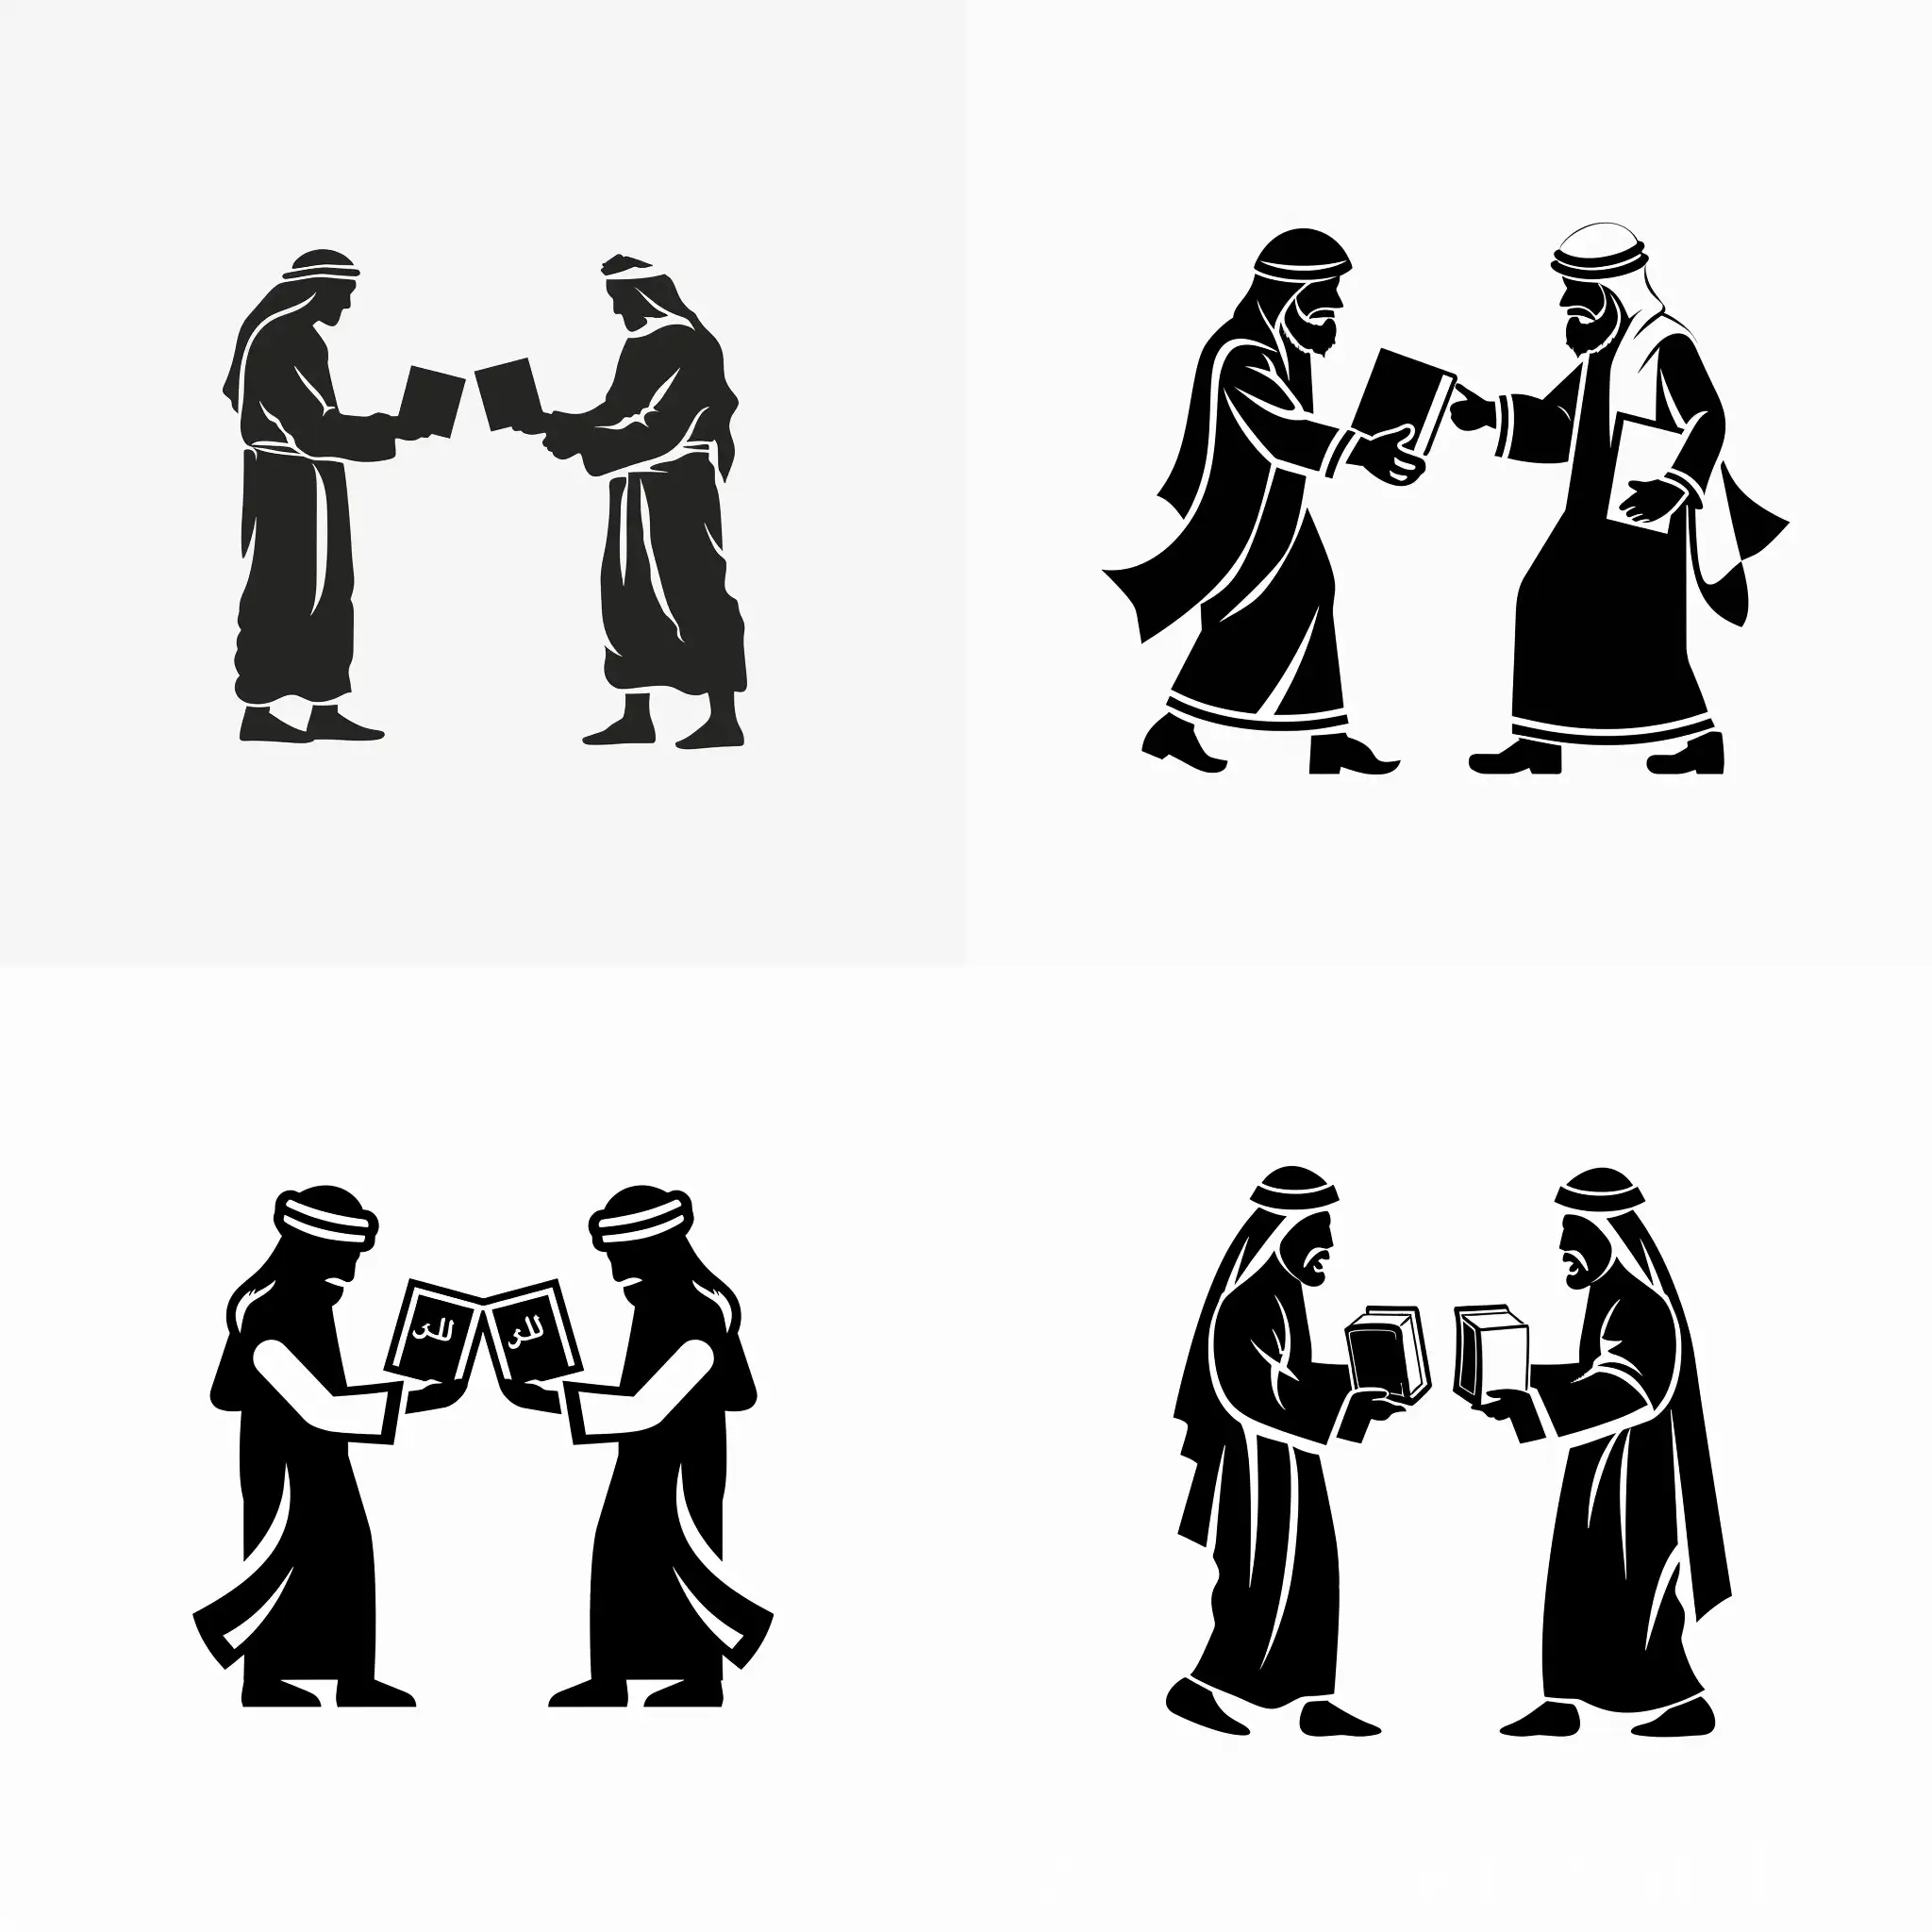 Smiple Logo of 2 Bedouin men exchanging books, make them full black with no background